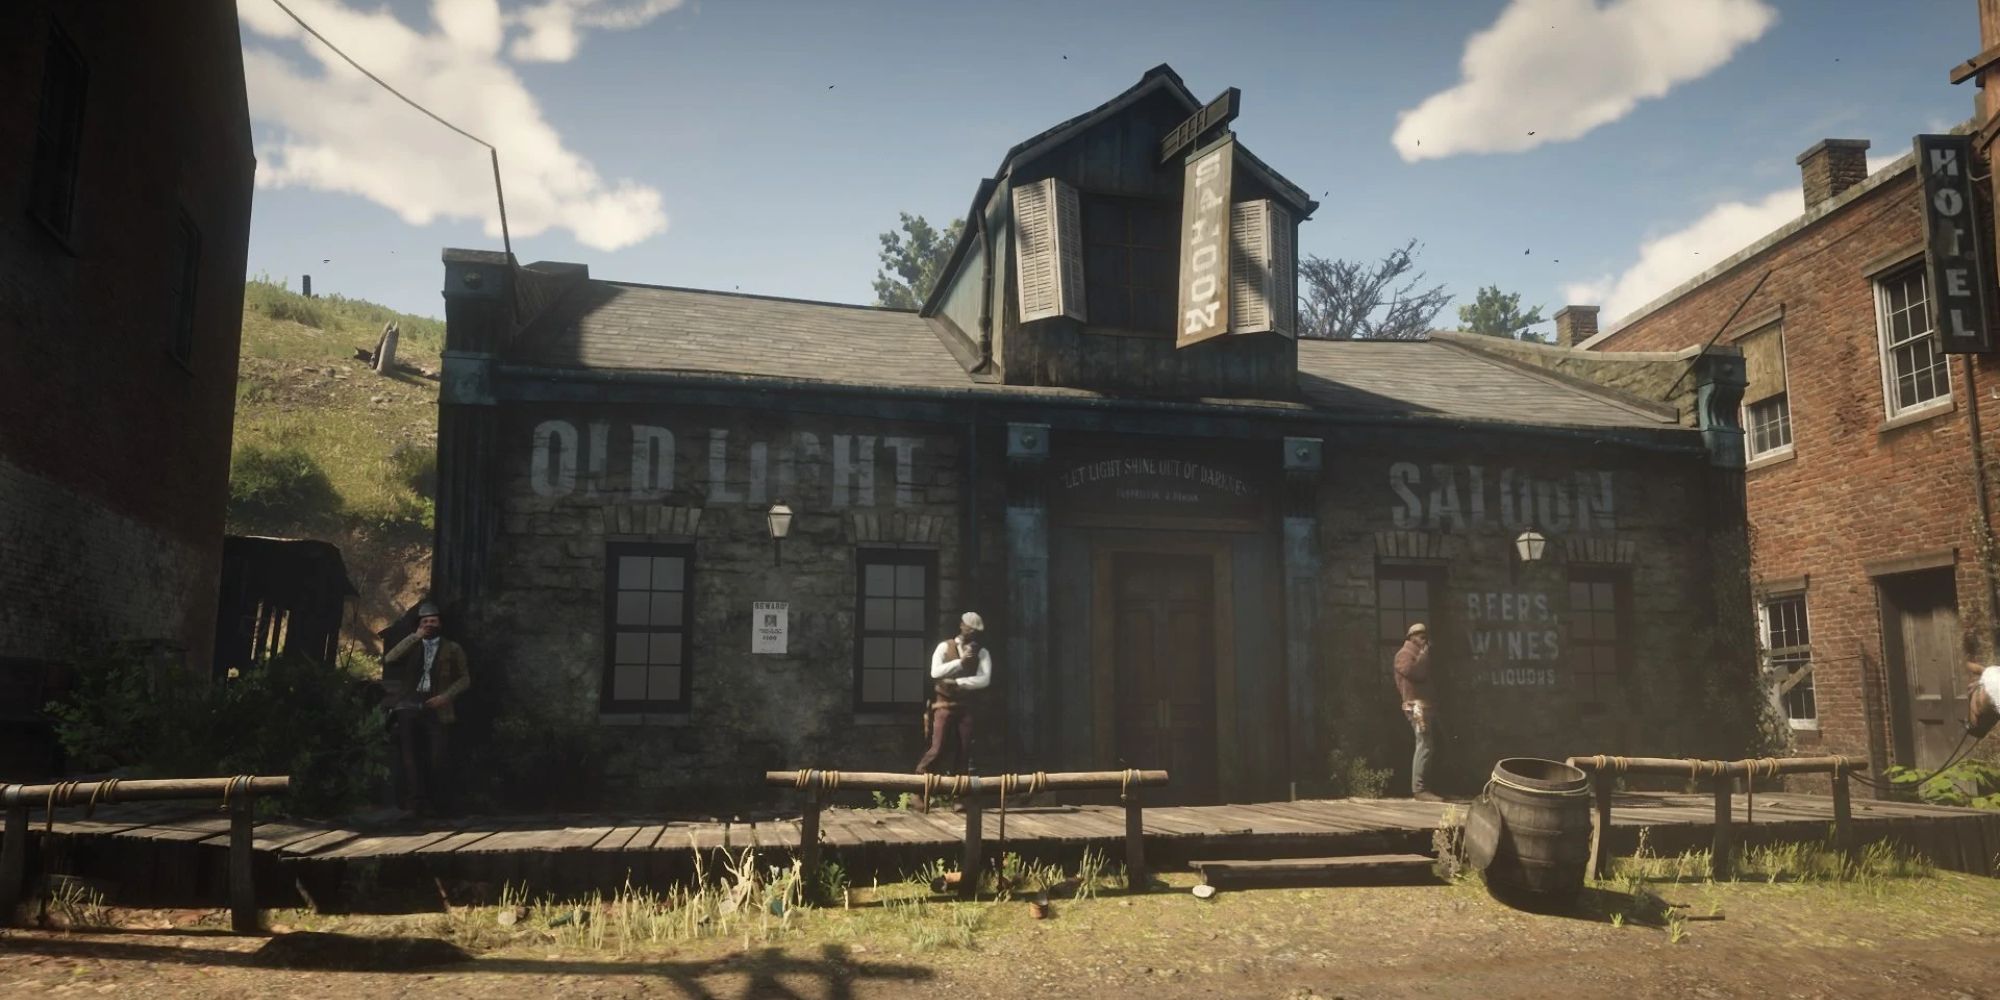 An image of the Van Horn Trading Post Saloon from Red Dead Redemption 2